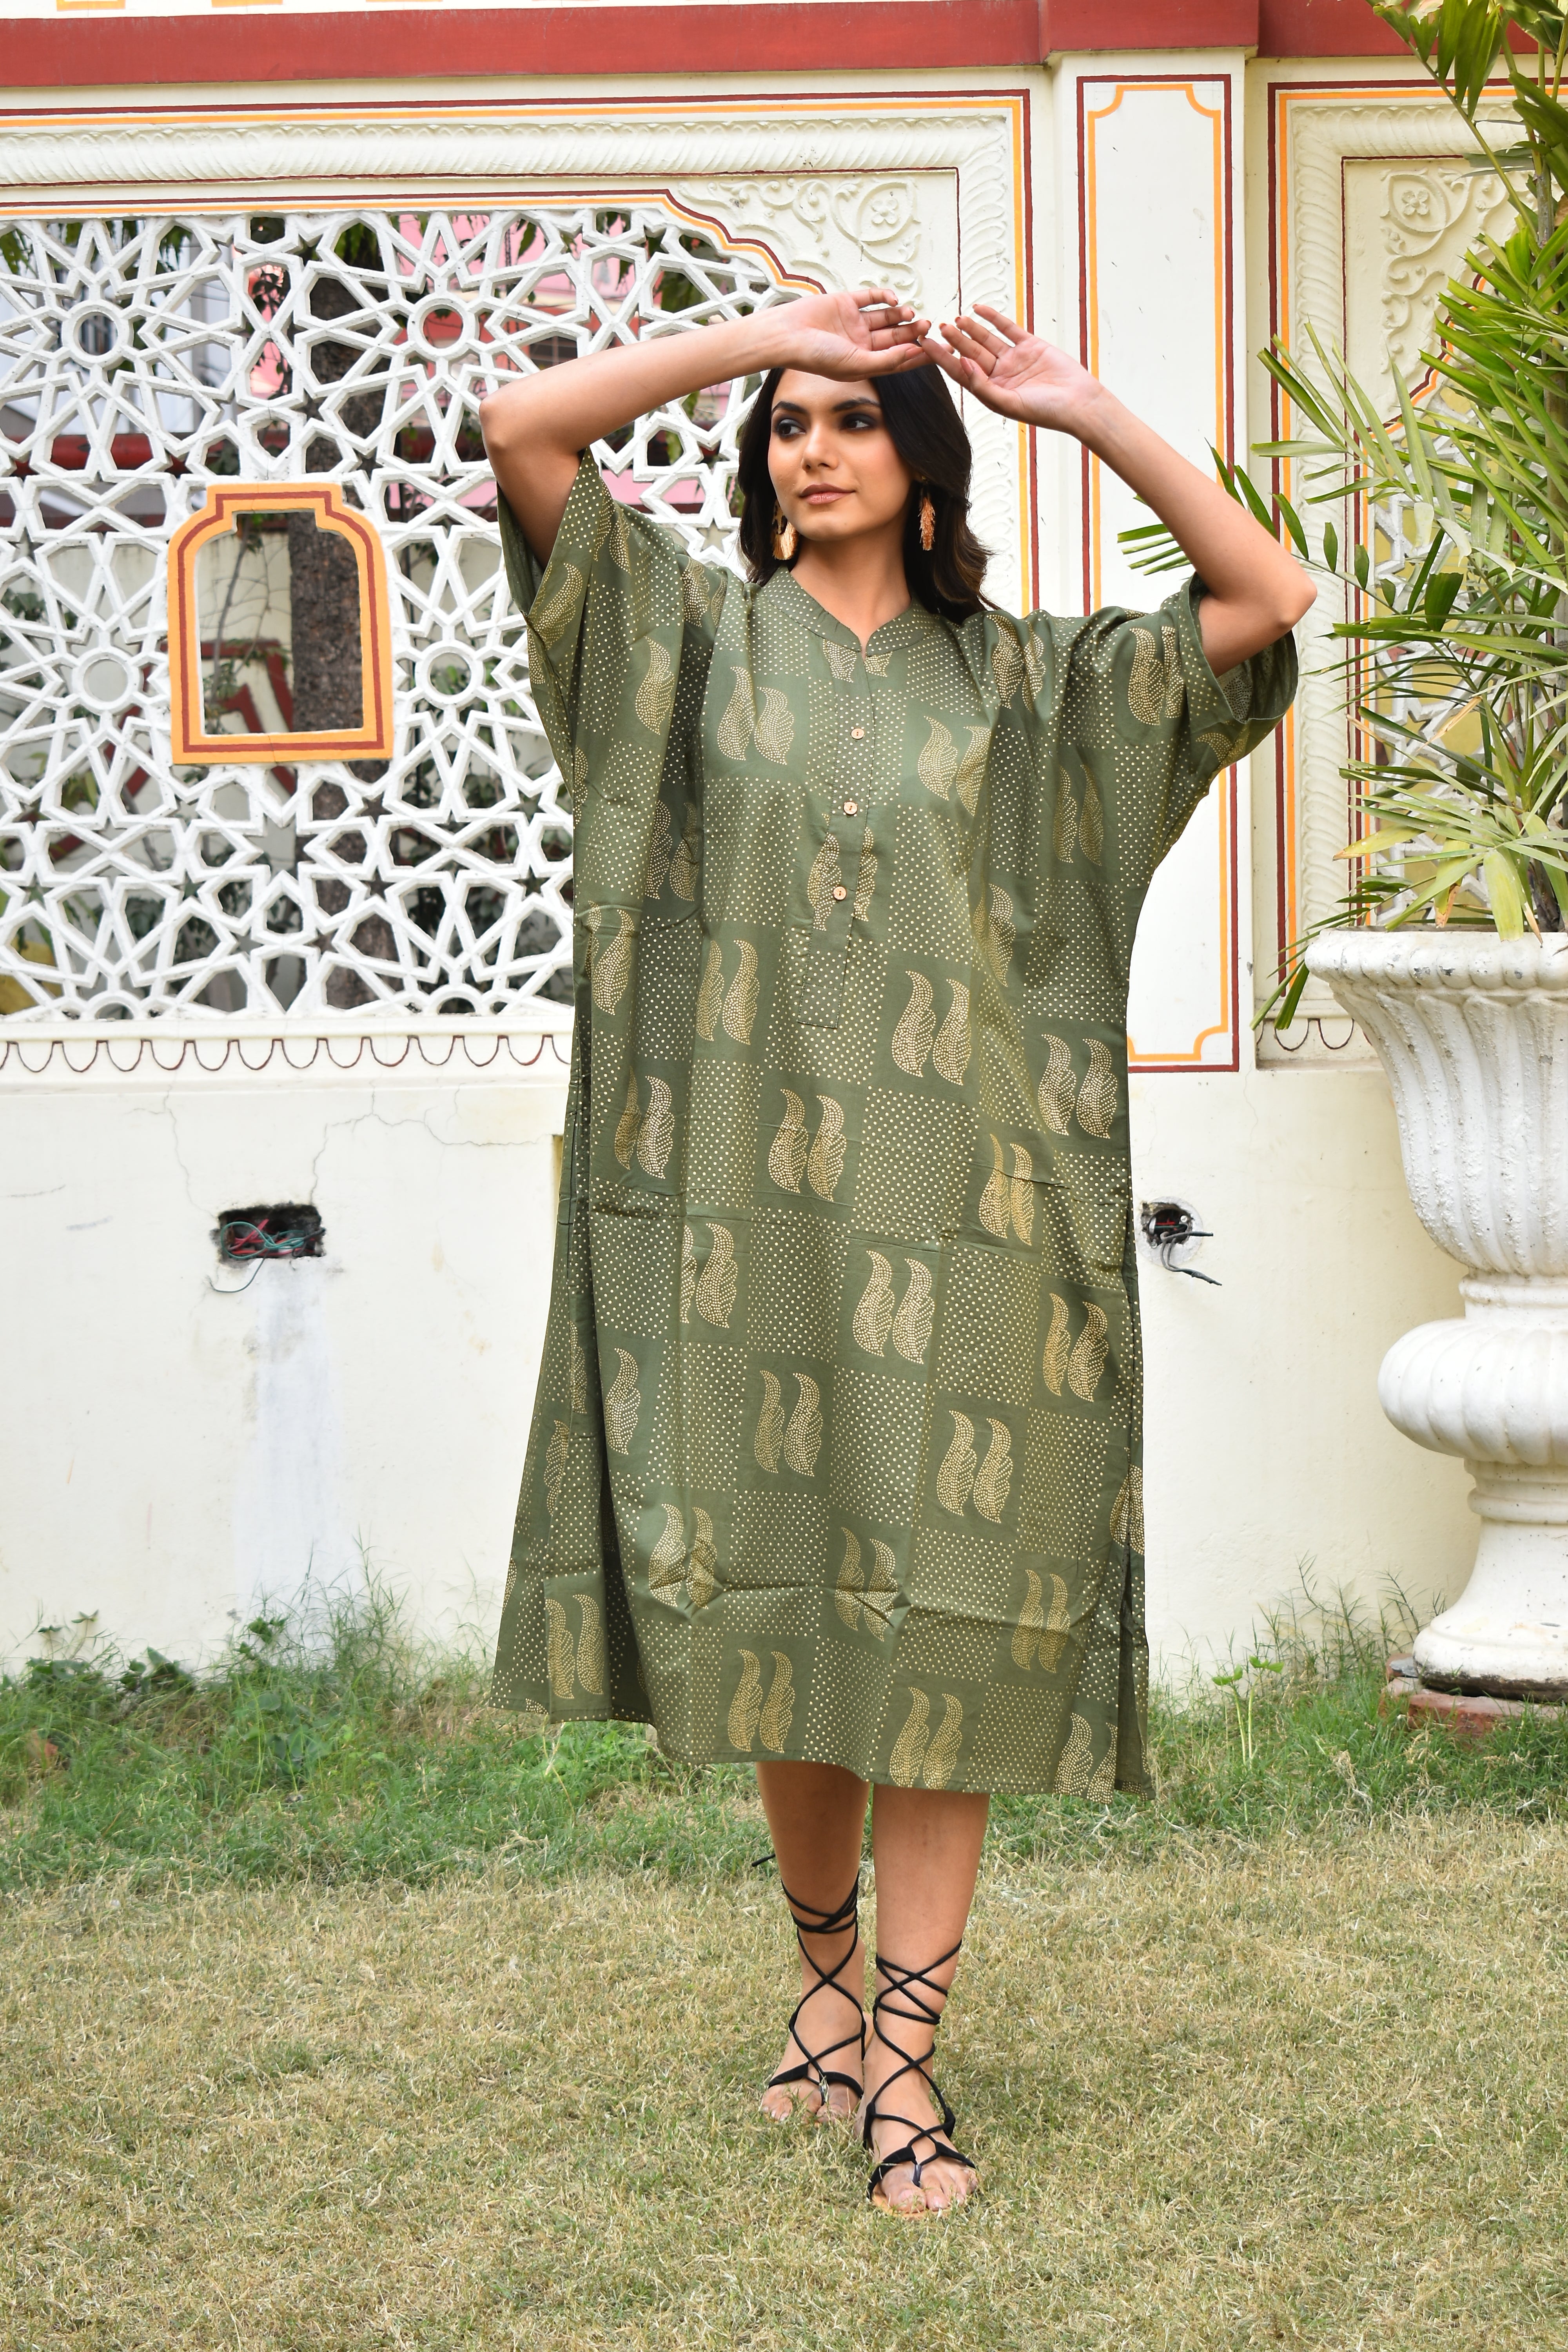 &quot;Handmade cotton shirt dress in green and gold: Unique artisanal creation, perfect for standout style.&quot;